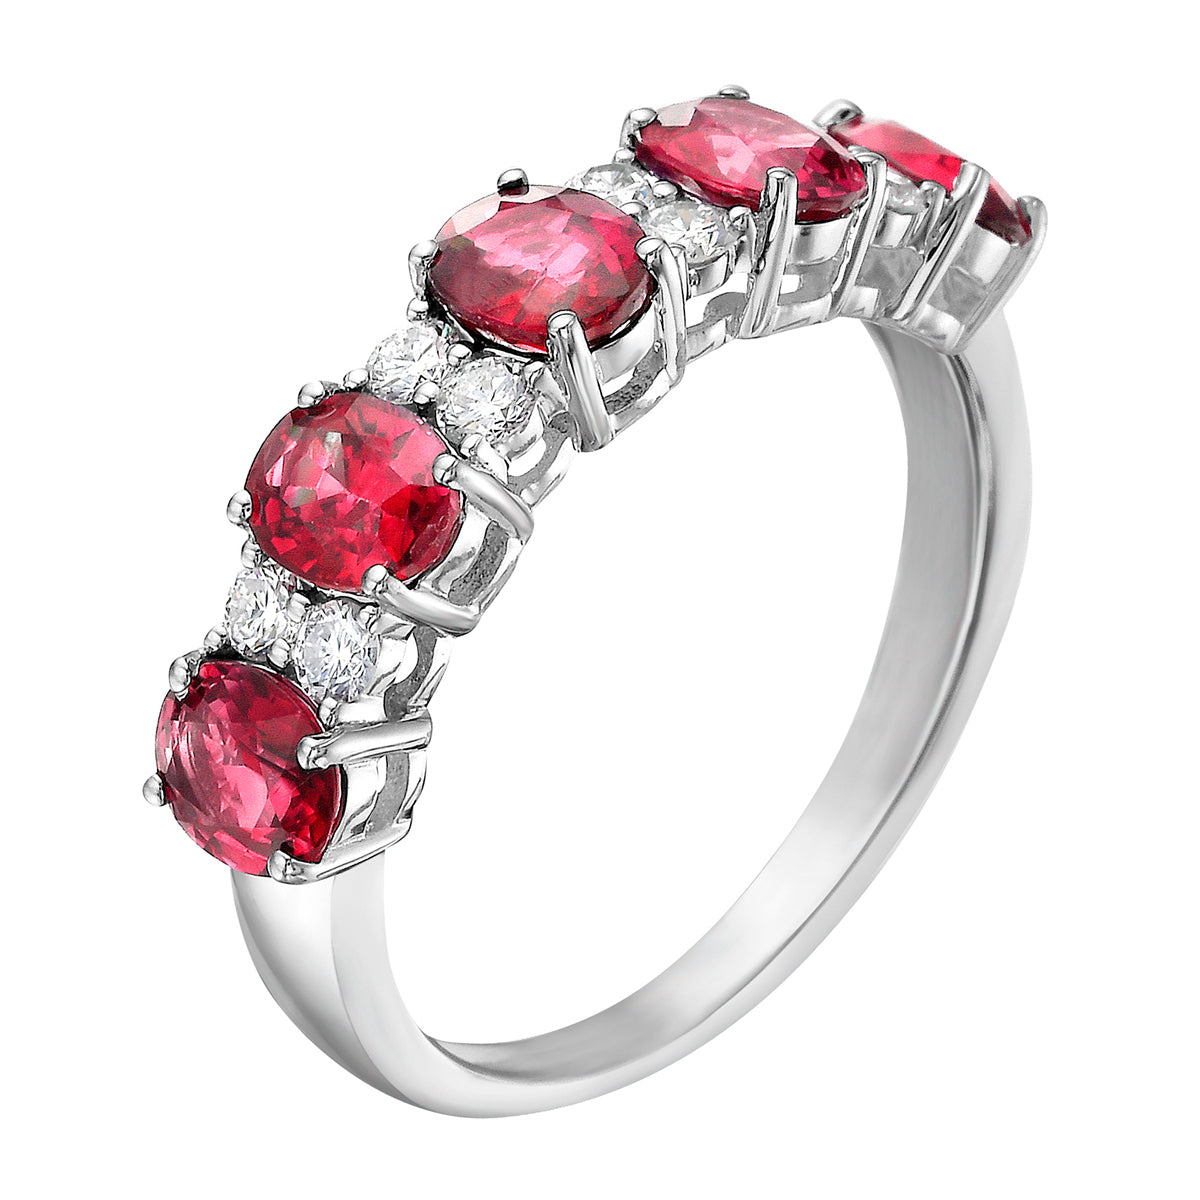 Ring 14KW/2.0G 5RUBY-1.89CT 8RD-0.26CT